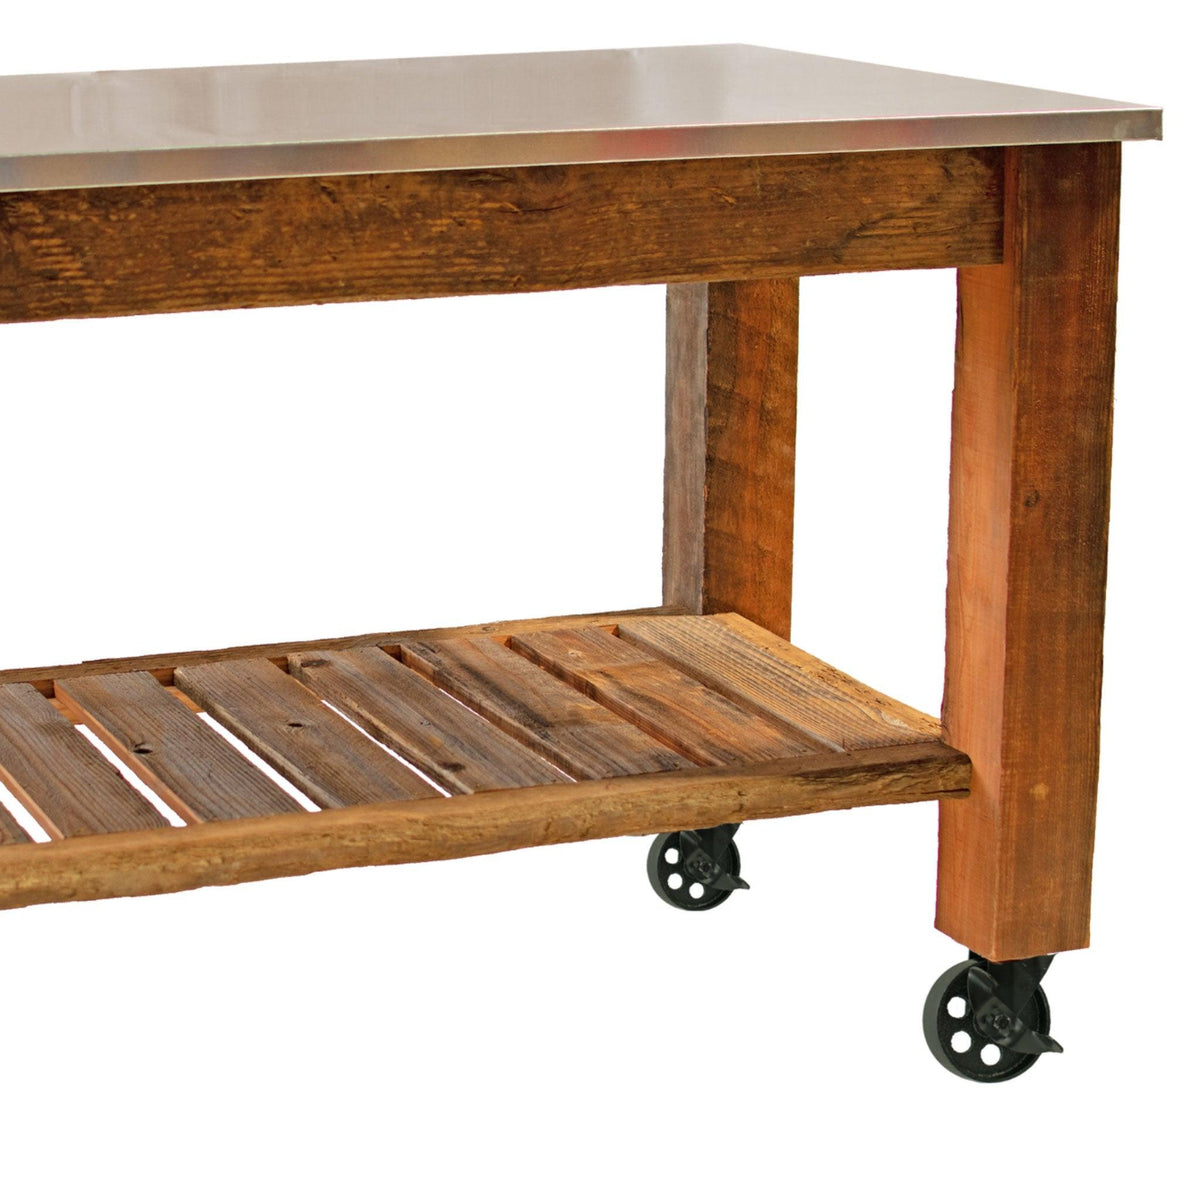 Side photo of Lee Display's Redwood Potting Table Rolling Cart with 5in Black Casters without Hardware Included on sale now at leedisplay.com